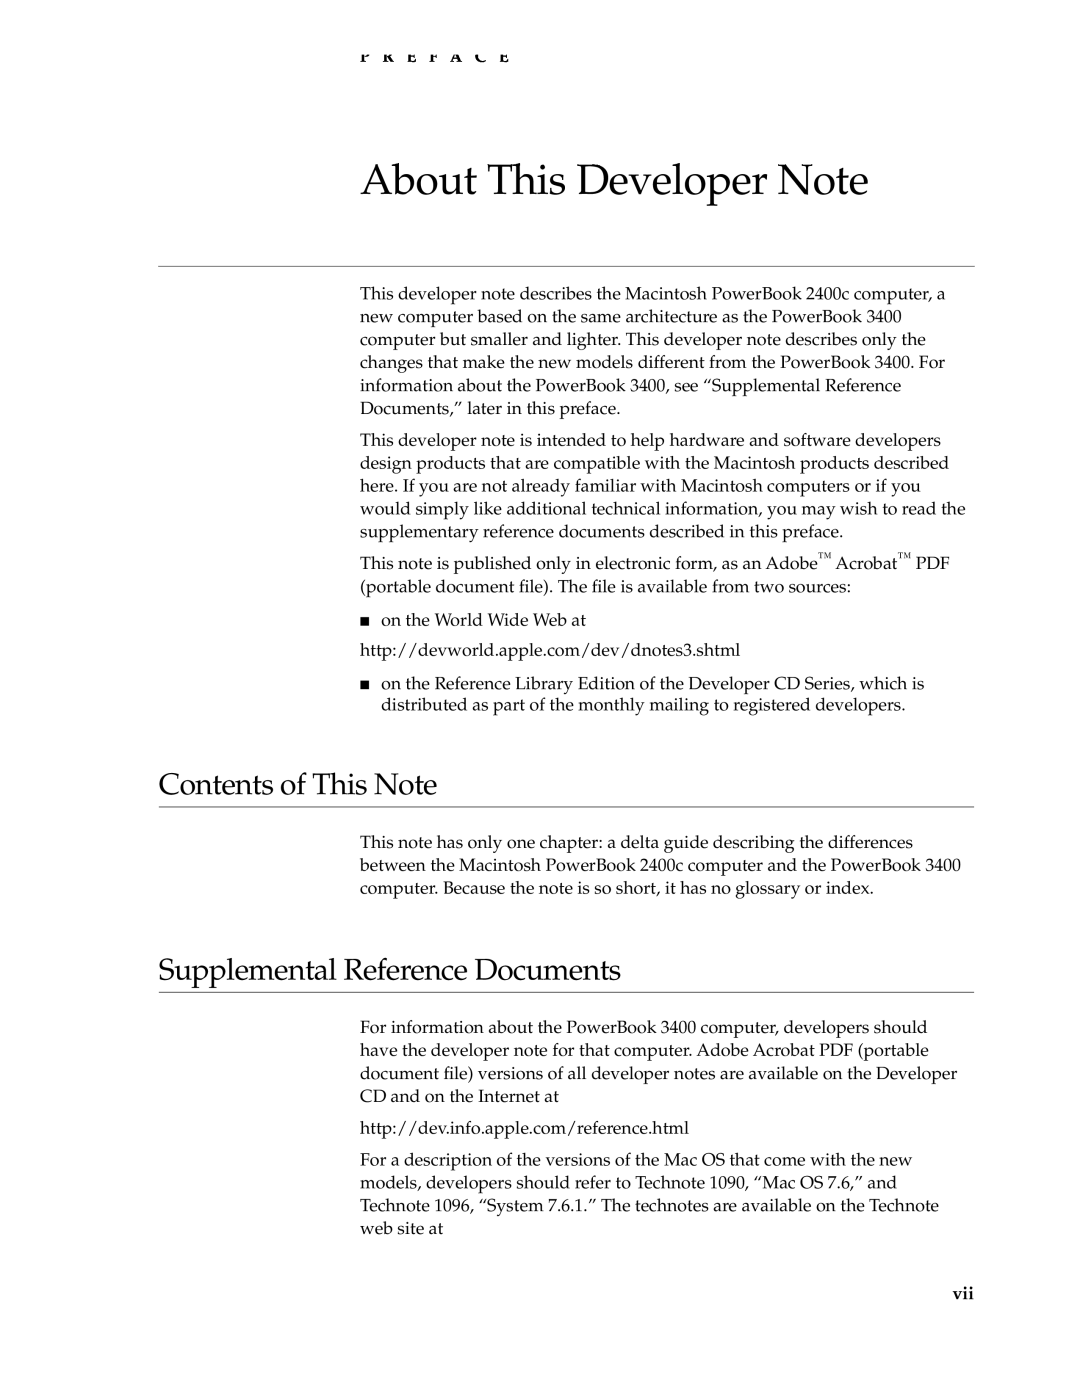 Apple 2400C manual About This Developer Note, Contents of This Note, Supplemental Reference Documents 